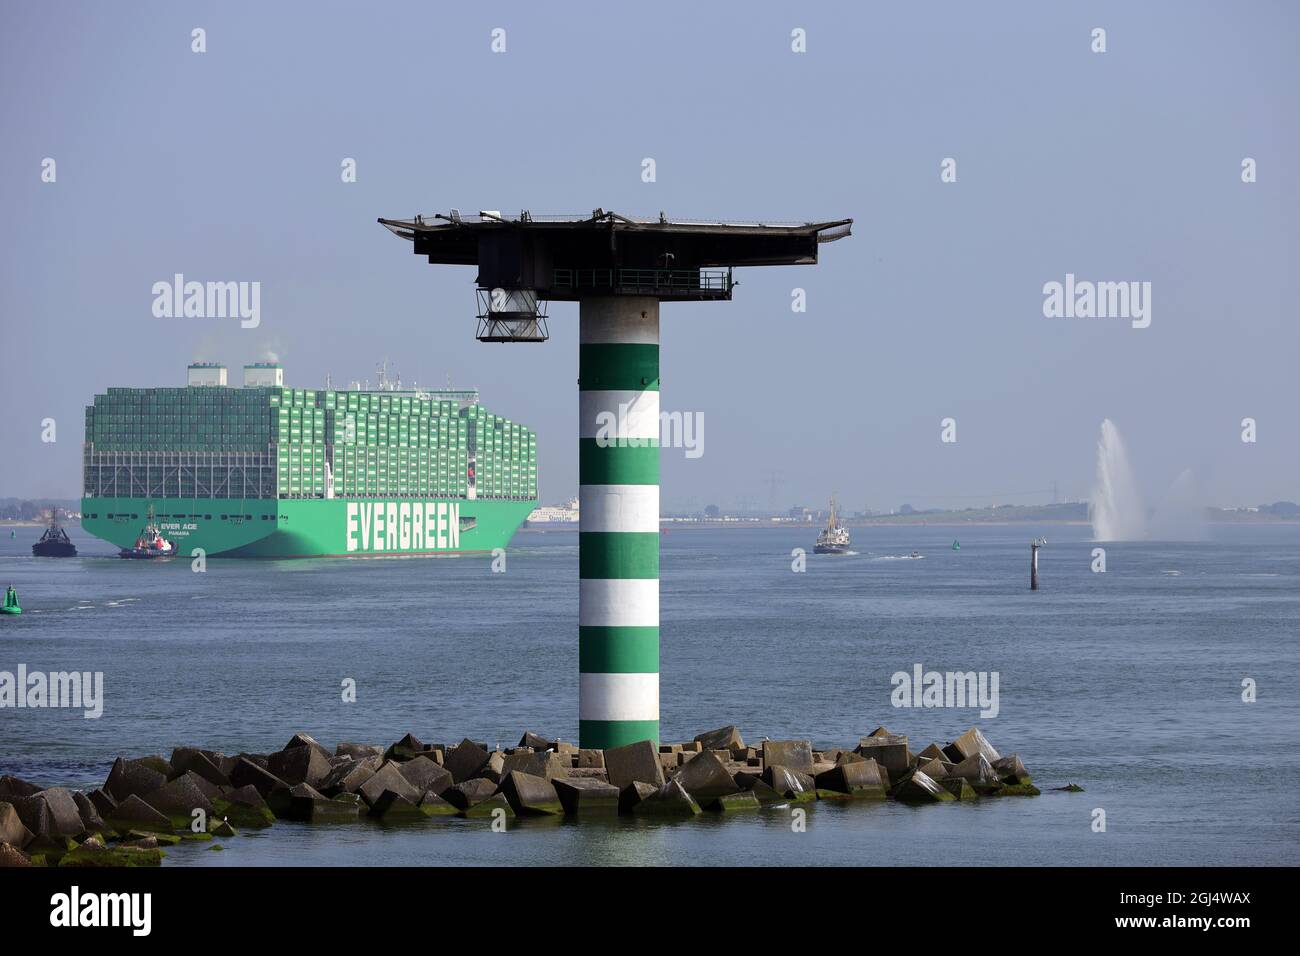 The container ship Ever Ace will reach the port of Rotterdam for the first time on September 4, 2021. Stock Photo